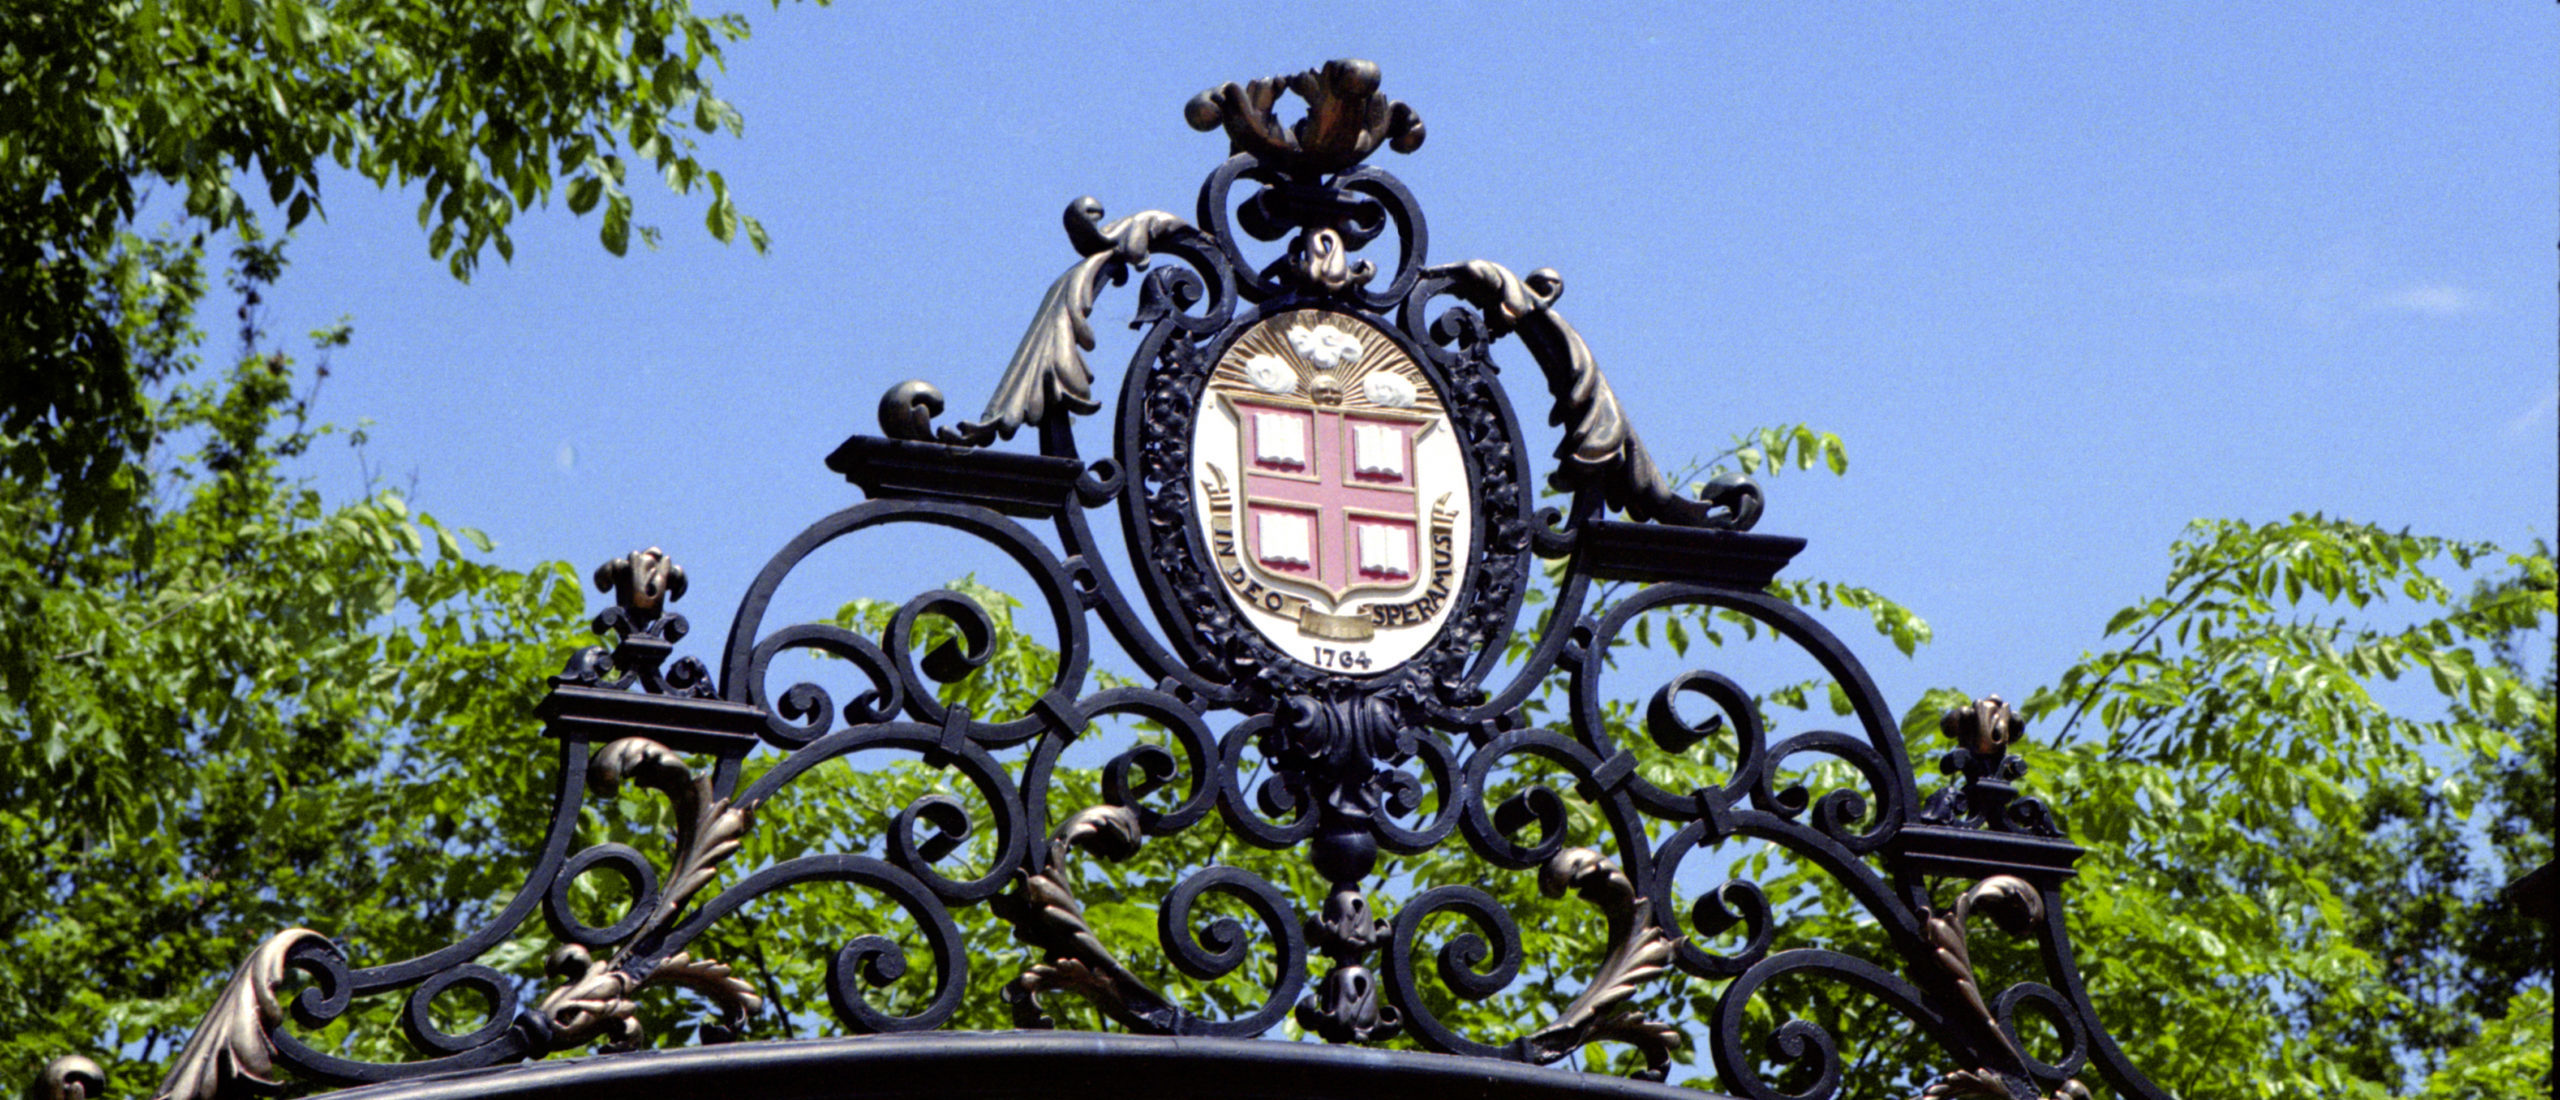 The Van Wickle Gates of Brown University (August 2012) Yiming Chen / Contributor Editorial #: 548778605 Collection: Moment Mobile Date created: April 11, 2015 Upload date: April 16, 2015 License type: Rights-managed